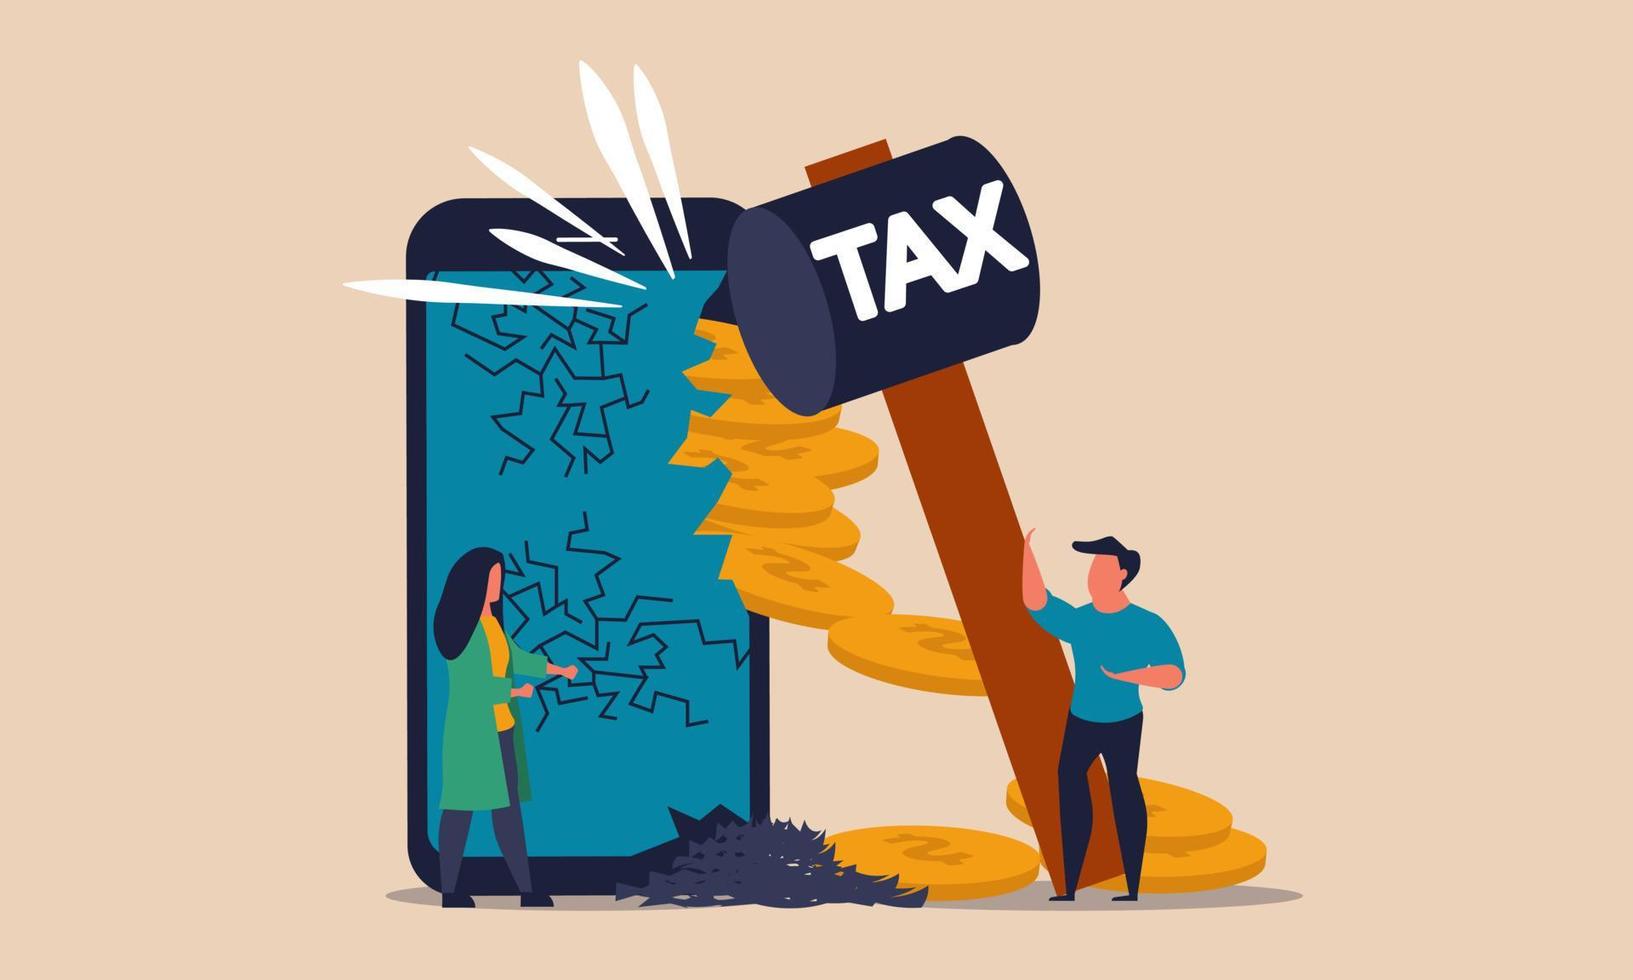 Tax mistake and danger crash finance economic. Employee loan and taxation stress bankruptcy vector illustration concept. Money fund problem investment and savings wealth. Business budget crisis